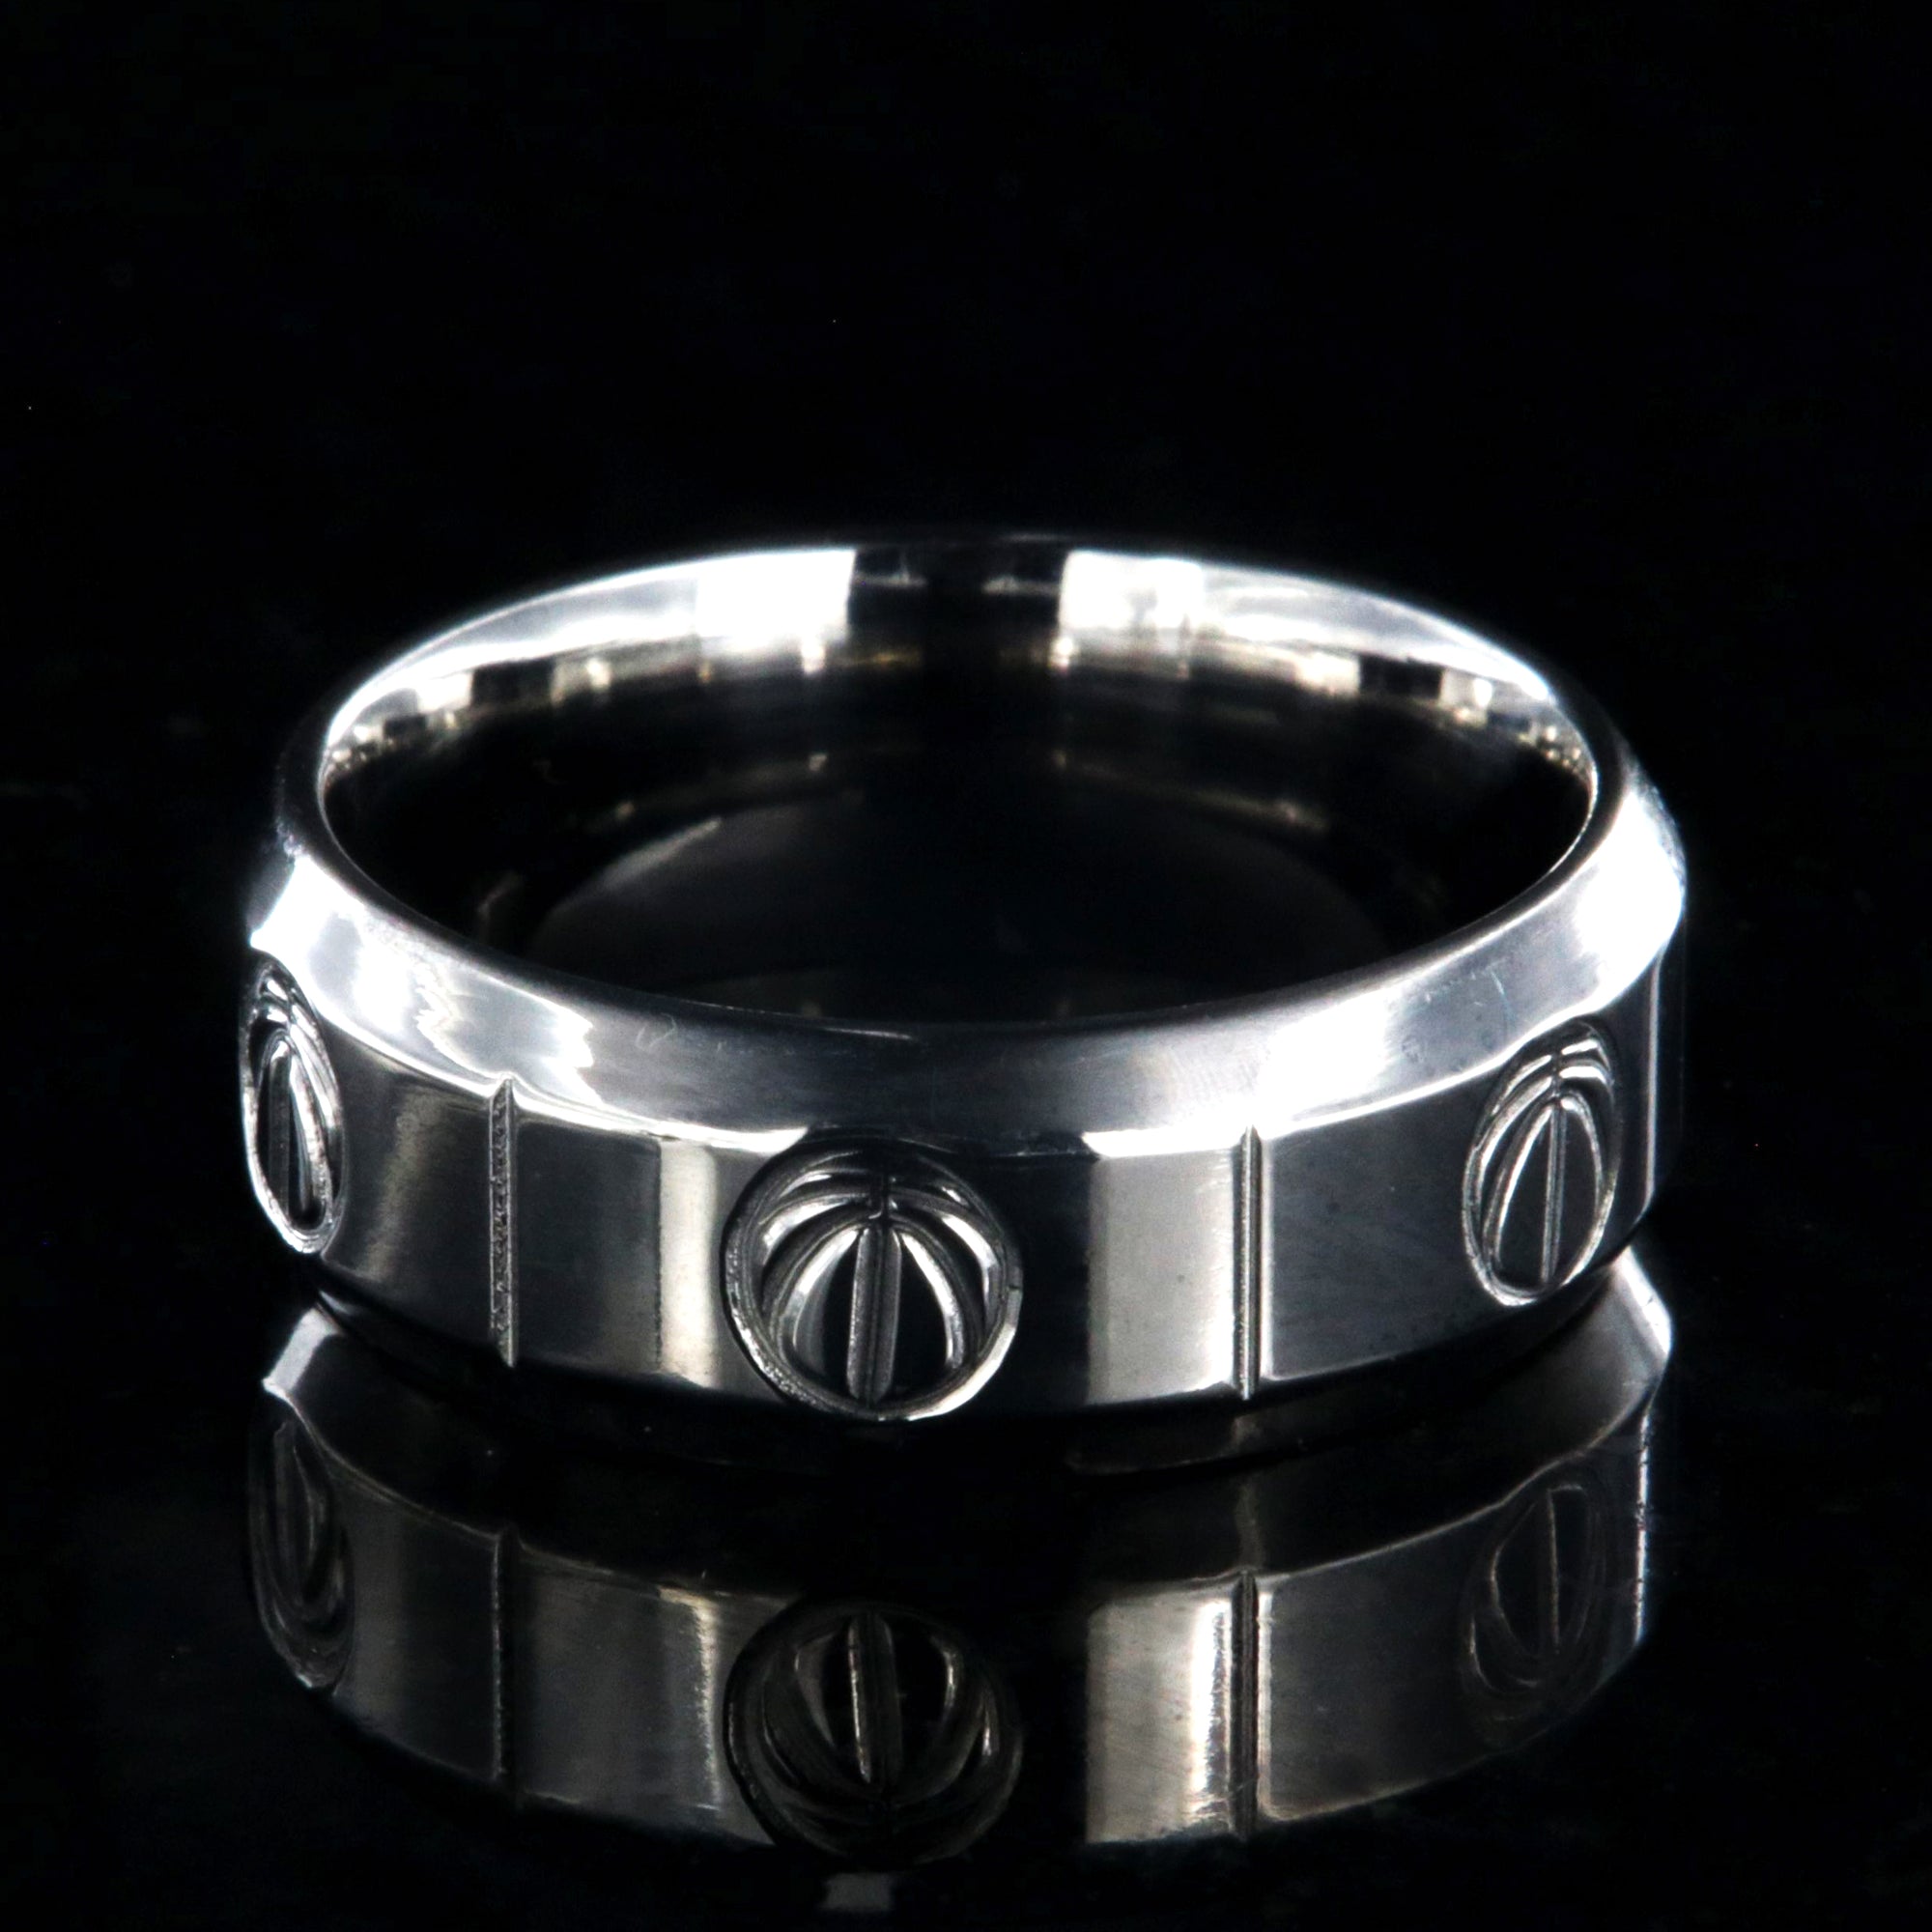 8mm wide titanium basketball ring with beveled edges, milled basketball design, and vertical grooves